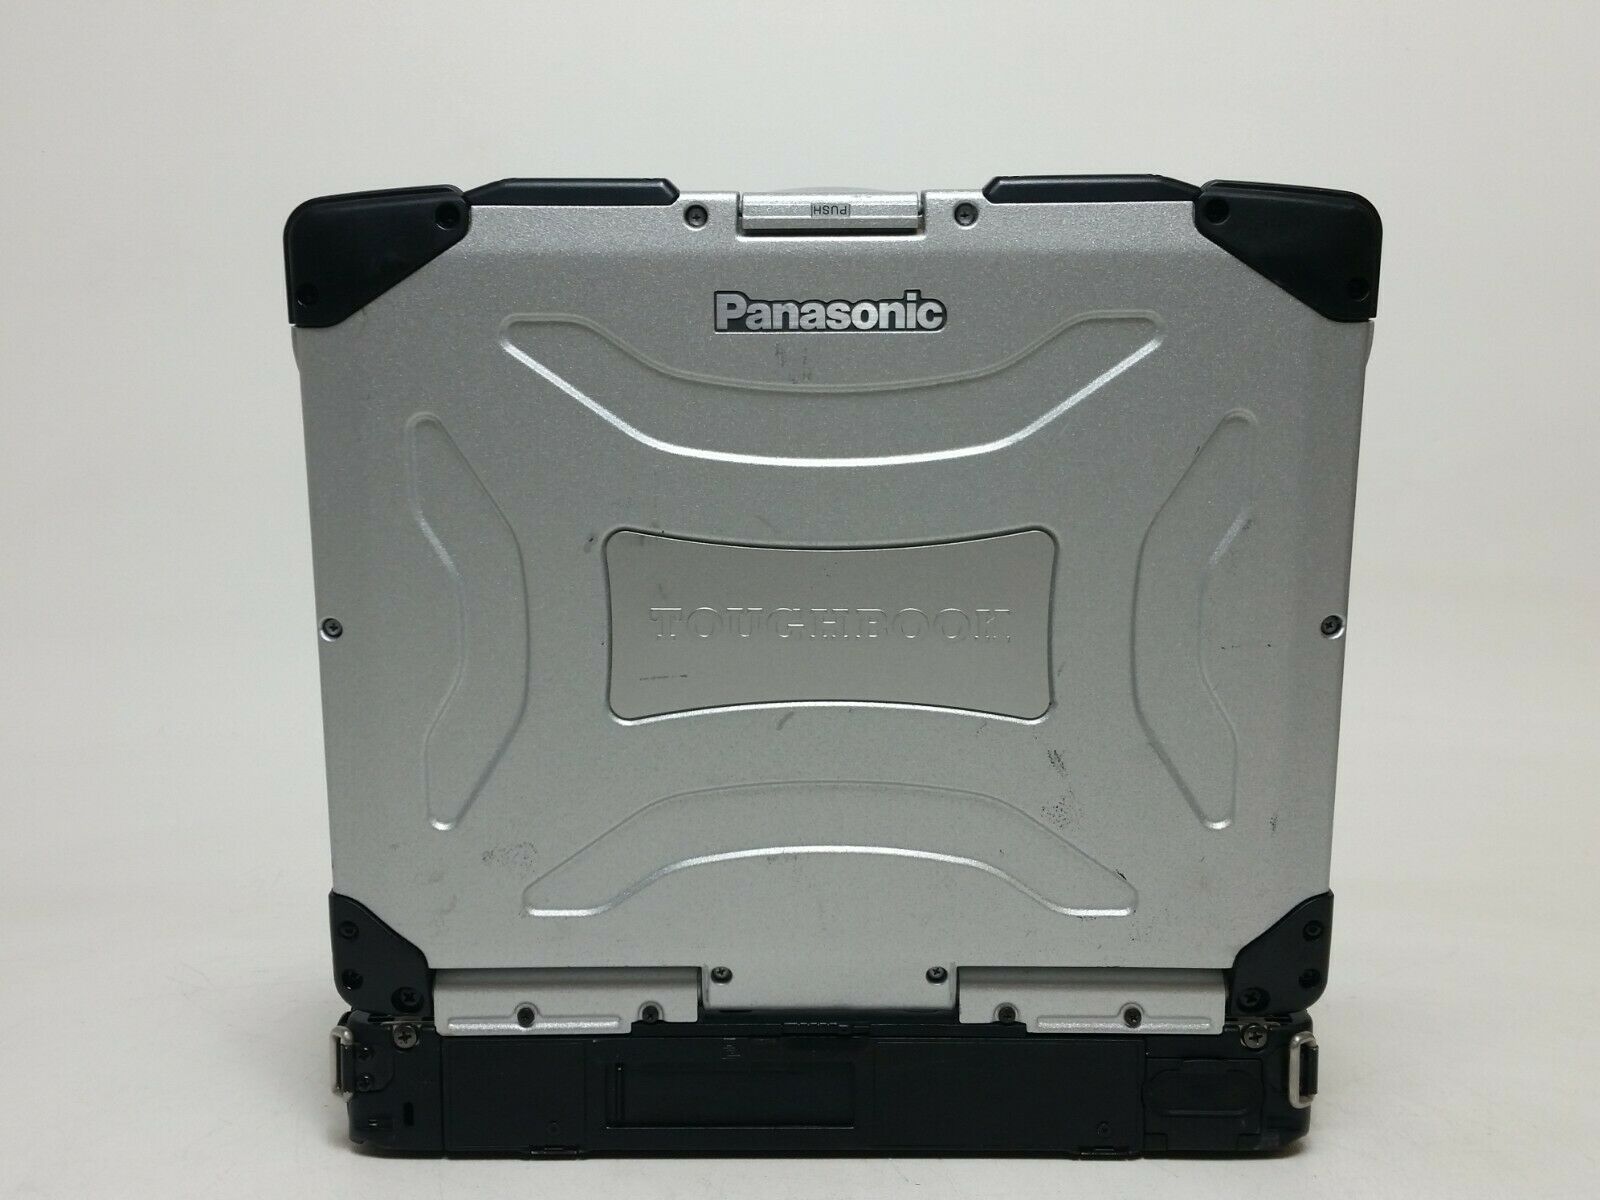 Panasonic Toughbook CF-29 LAPTOP 1.3GHz MK2 No HDD/Caddy/OS *Boots to – Computer Surplus